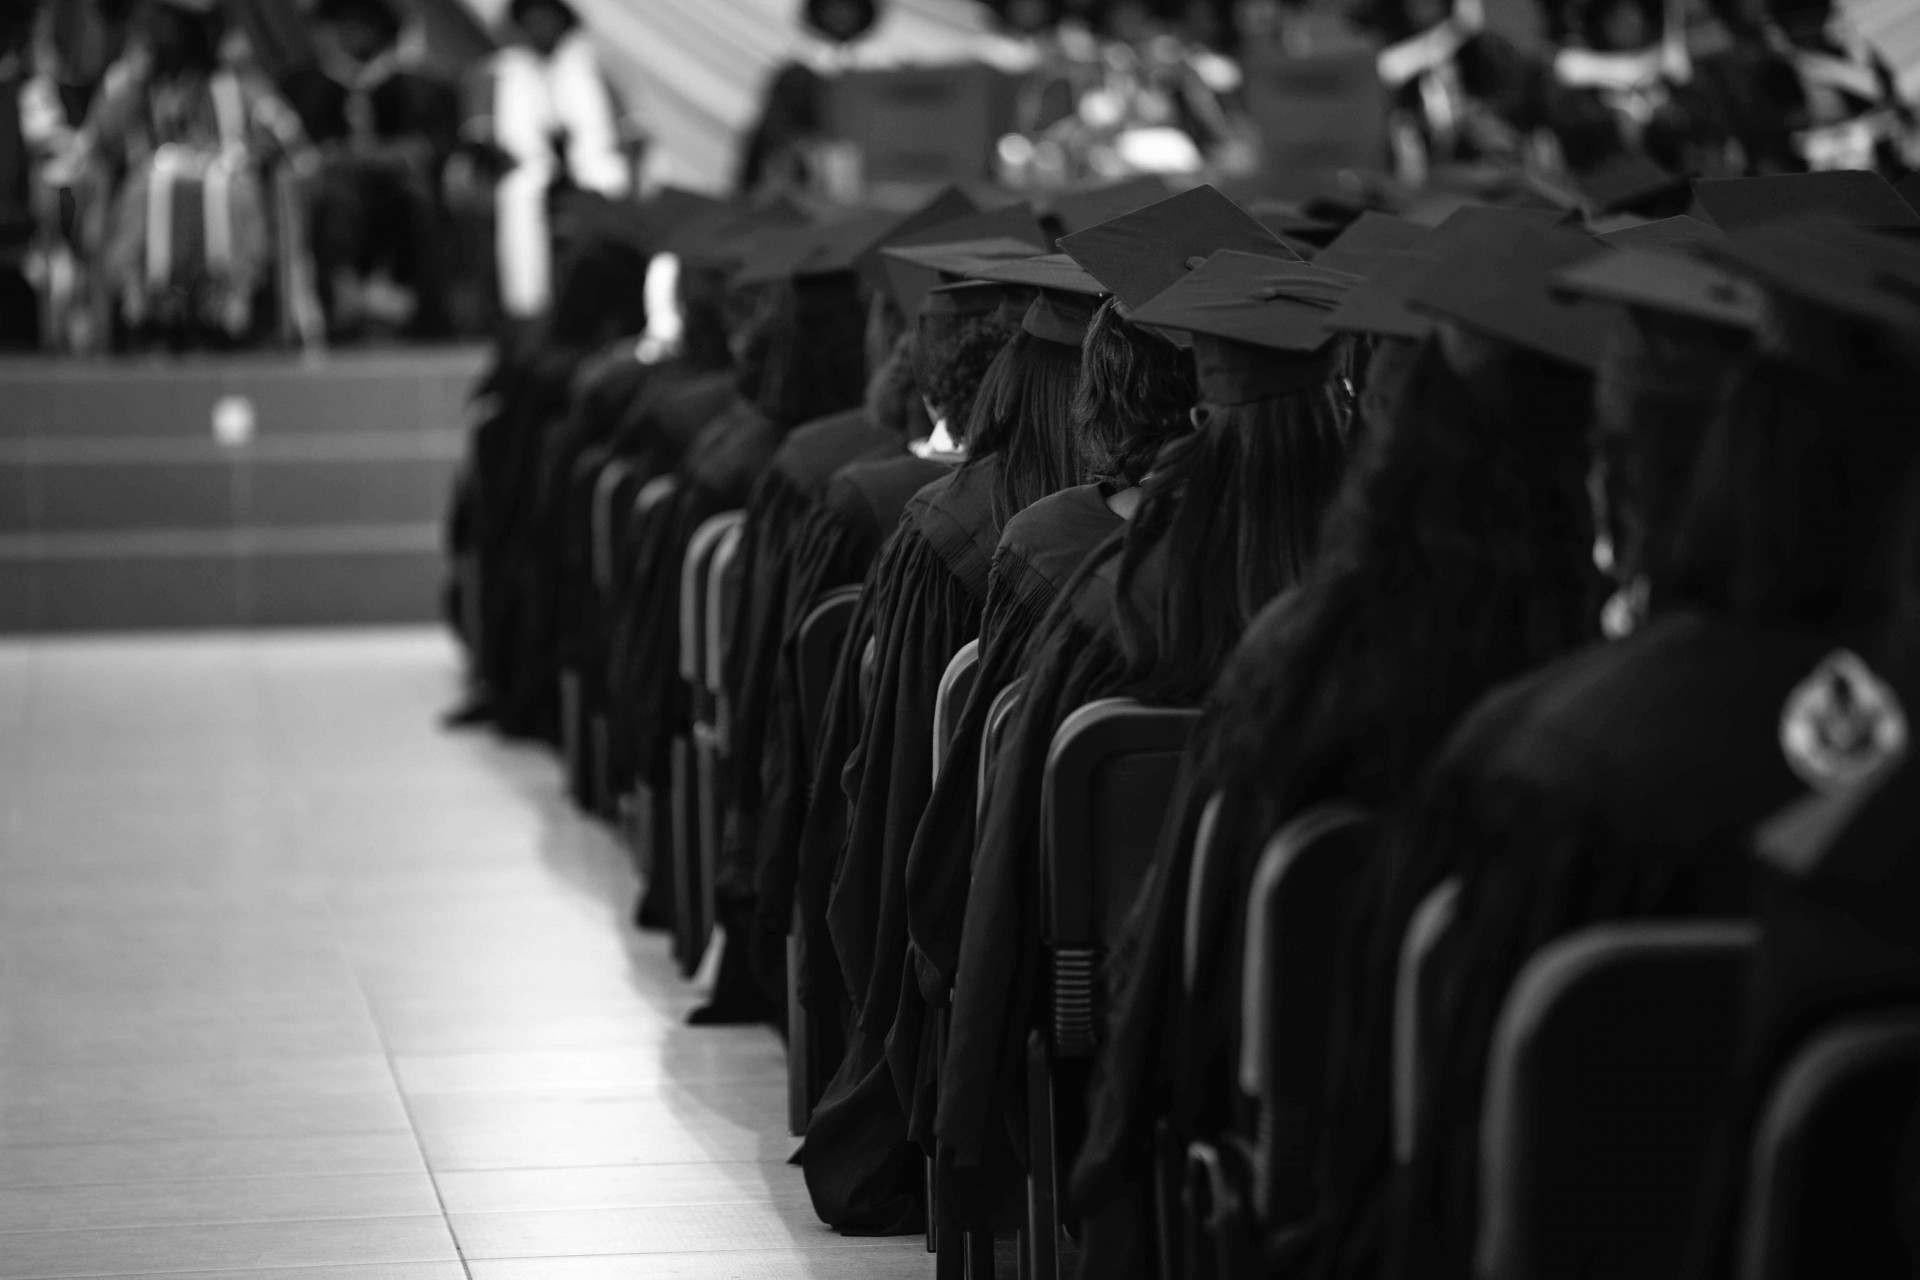 So, You’ve Graduated College… Now What? Adulting “101”